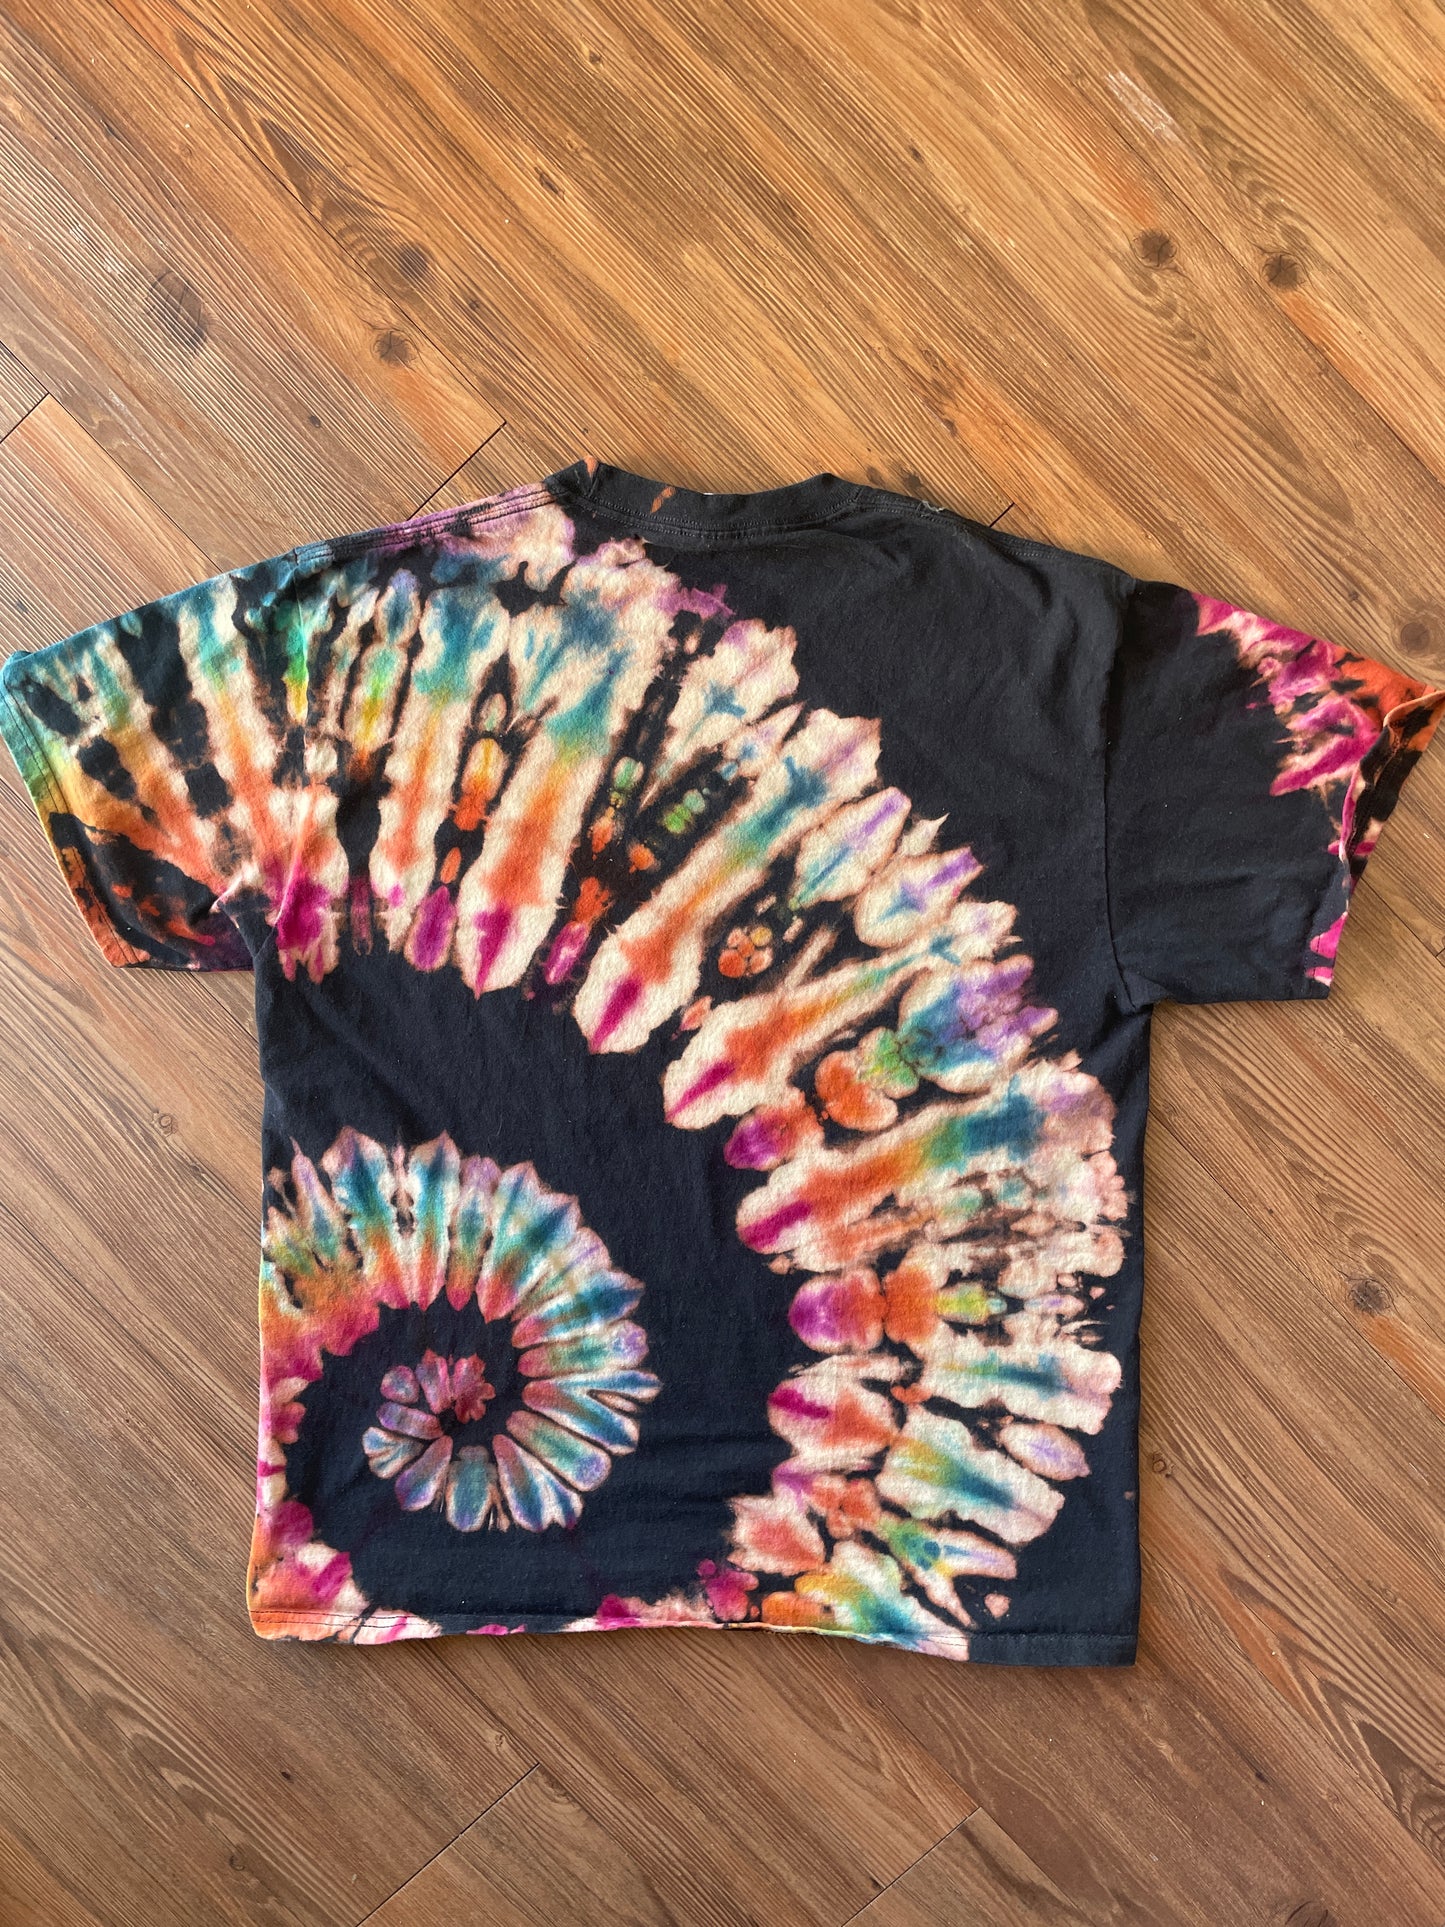 LARGE Men’s I Want To Ride My Bicycle Handmade Tie Dye T-Shirt | One-Of-a-Kind Black and Rainbow Spiral Short Sleeve